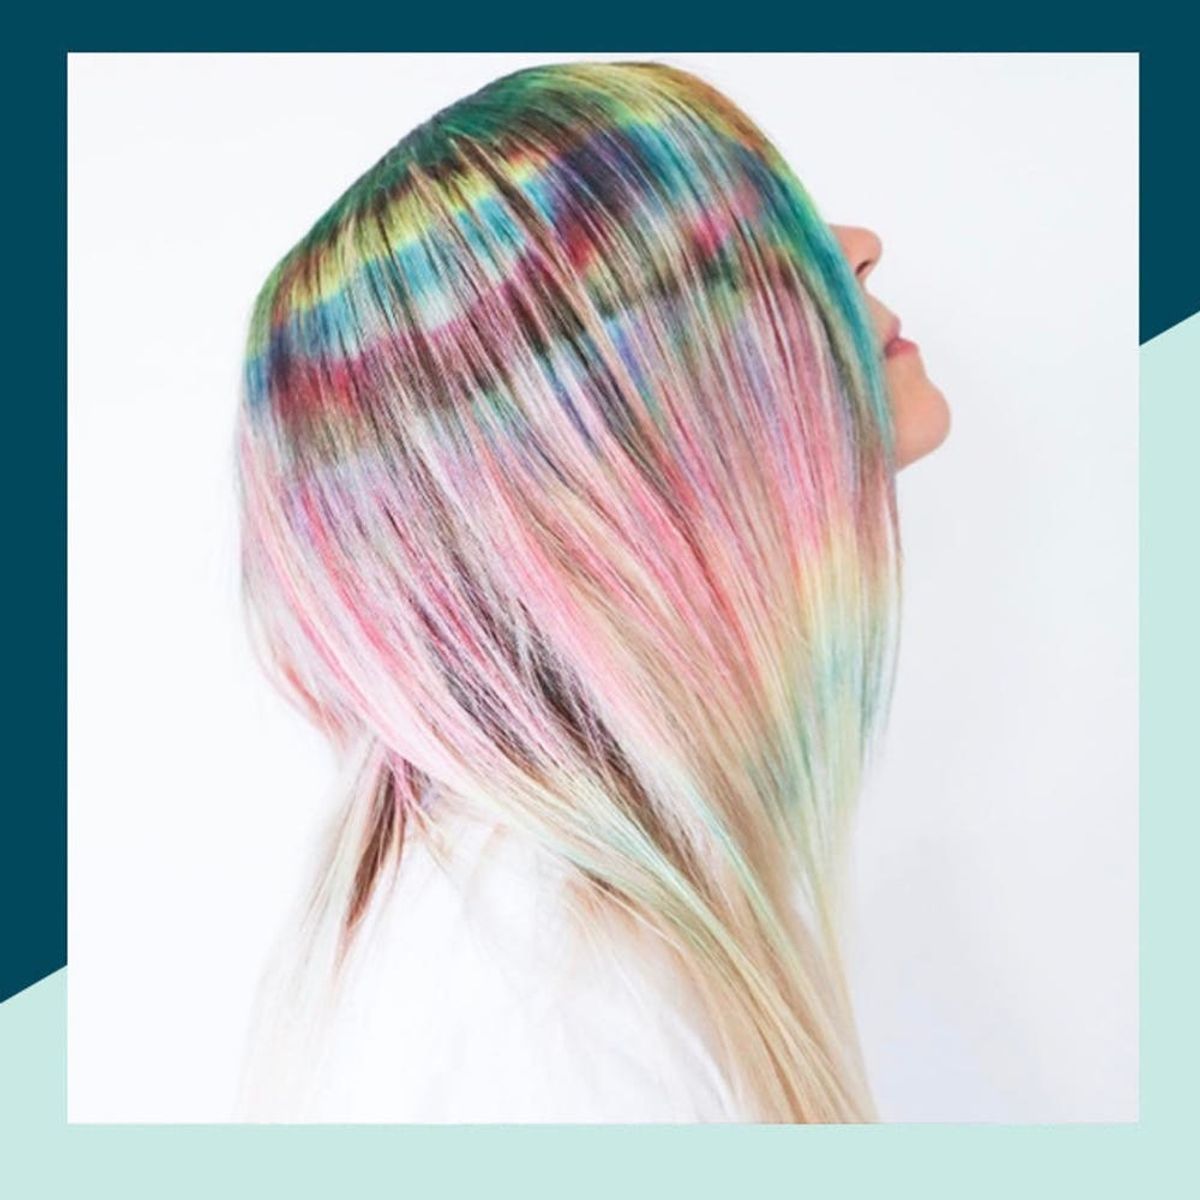 This Rainbow Highlight Hair Trend Is Totally Worth the Upkeep